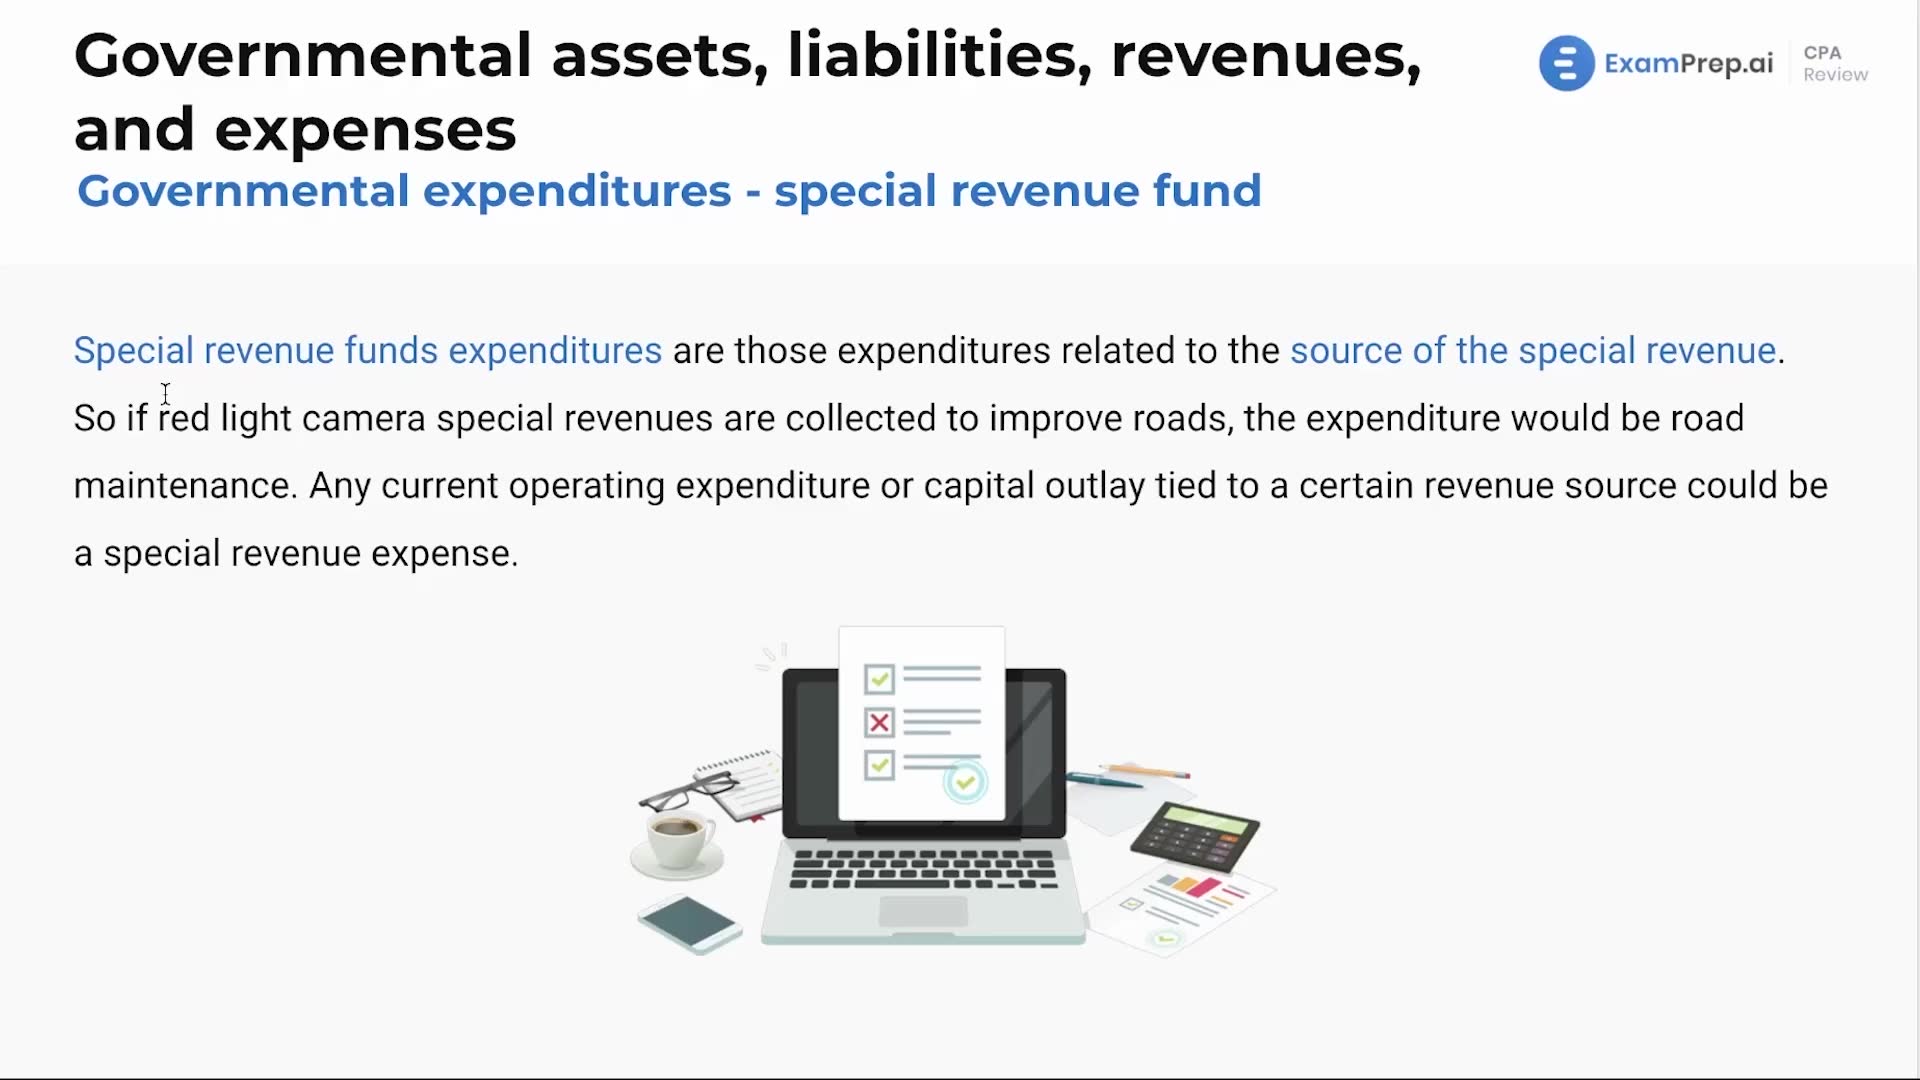 Governmental Expenditures - Special Revenue Fund lesson thumbnail